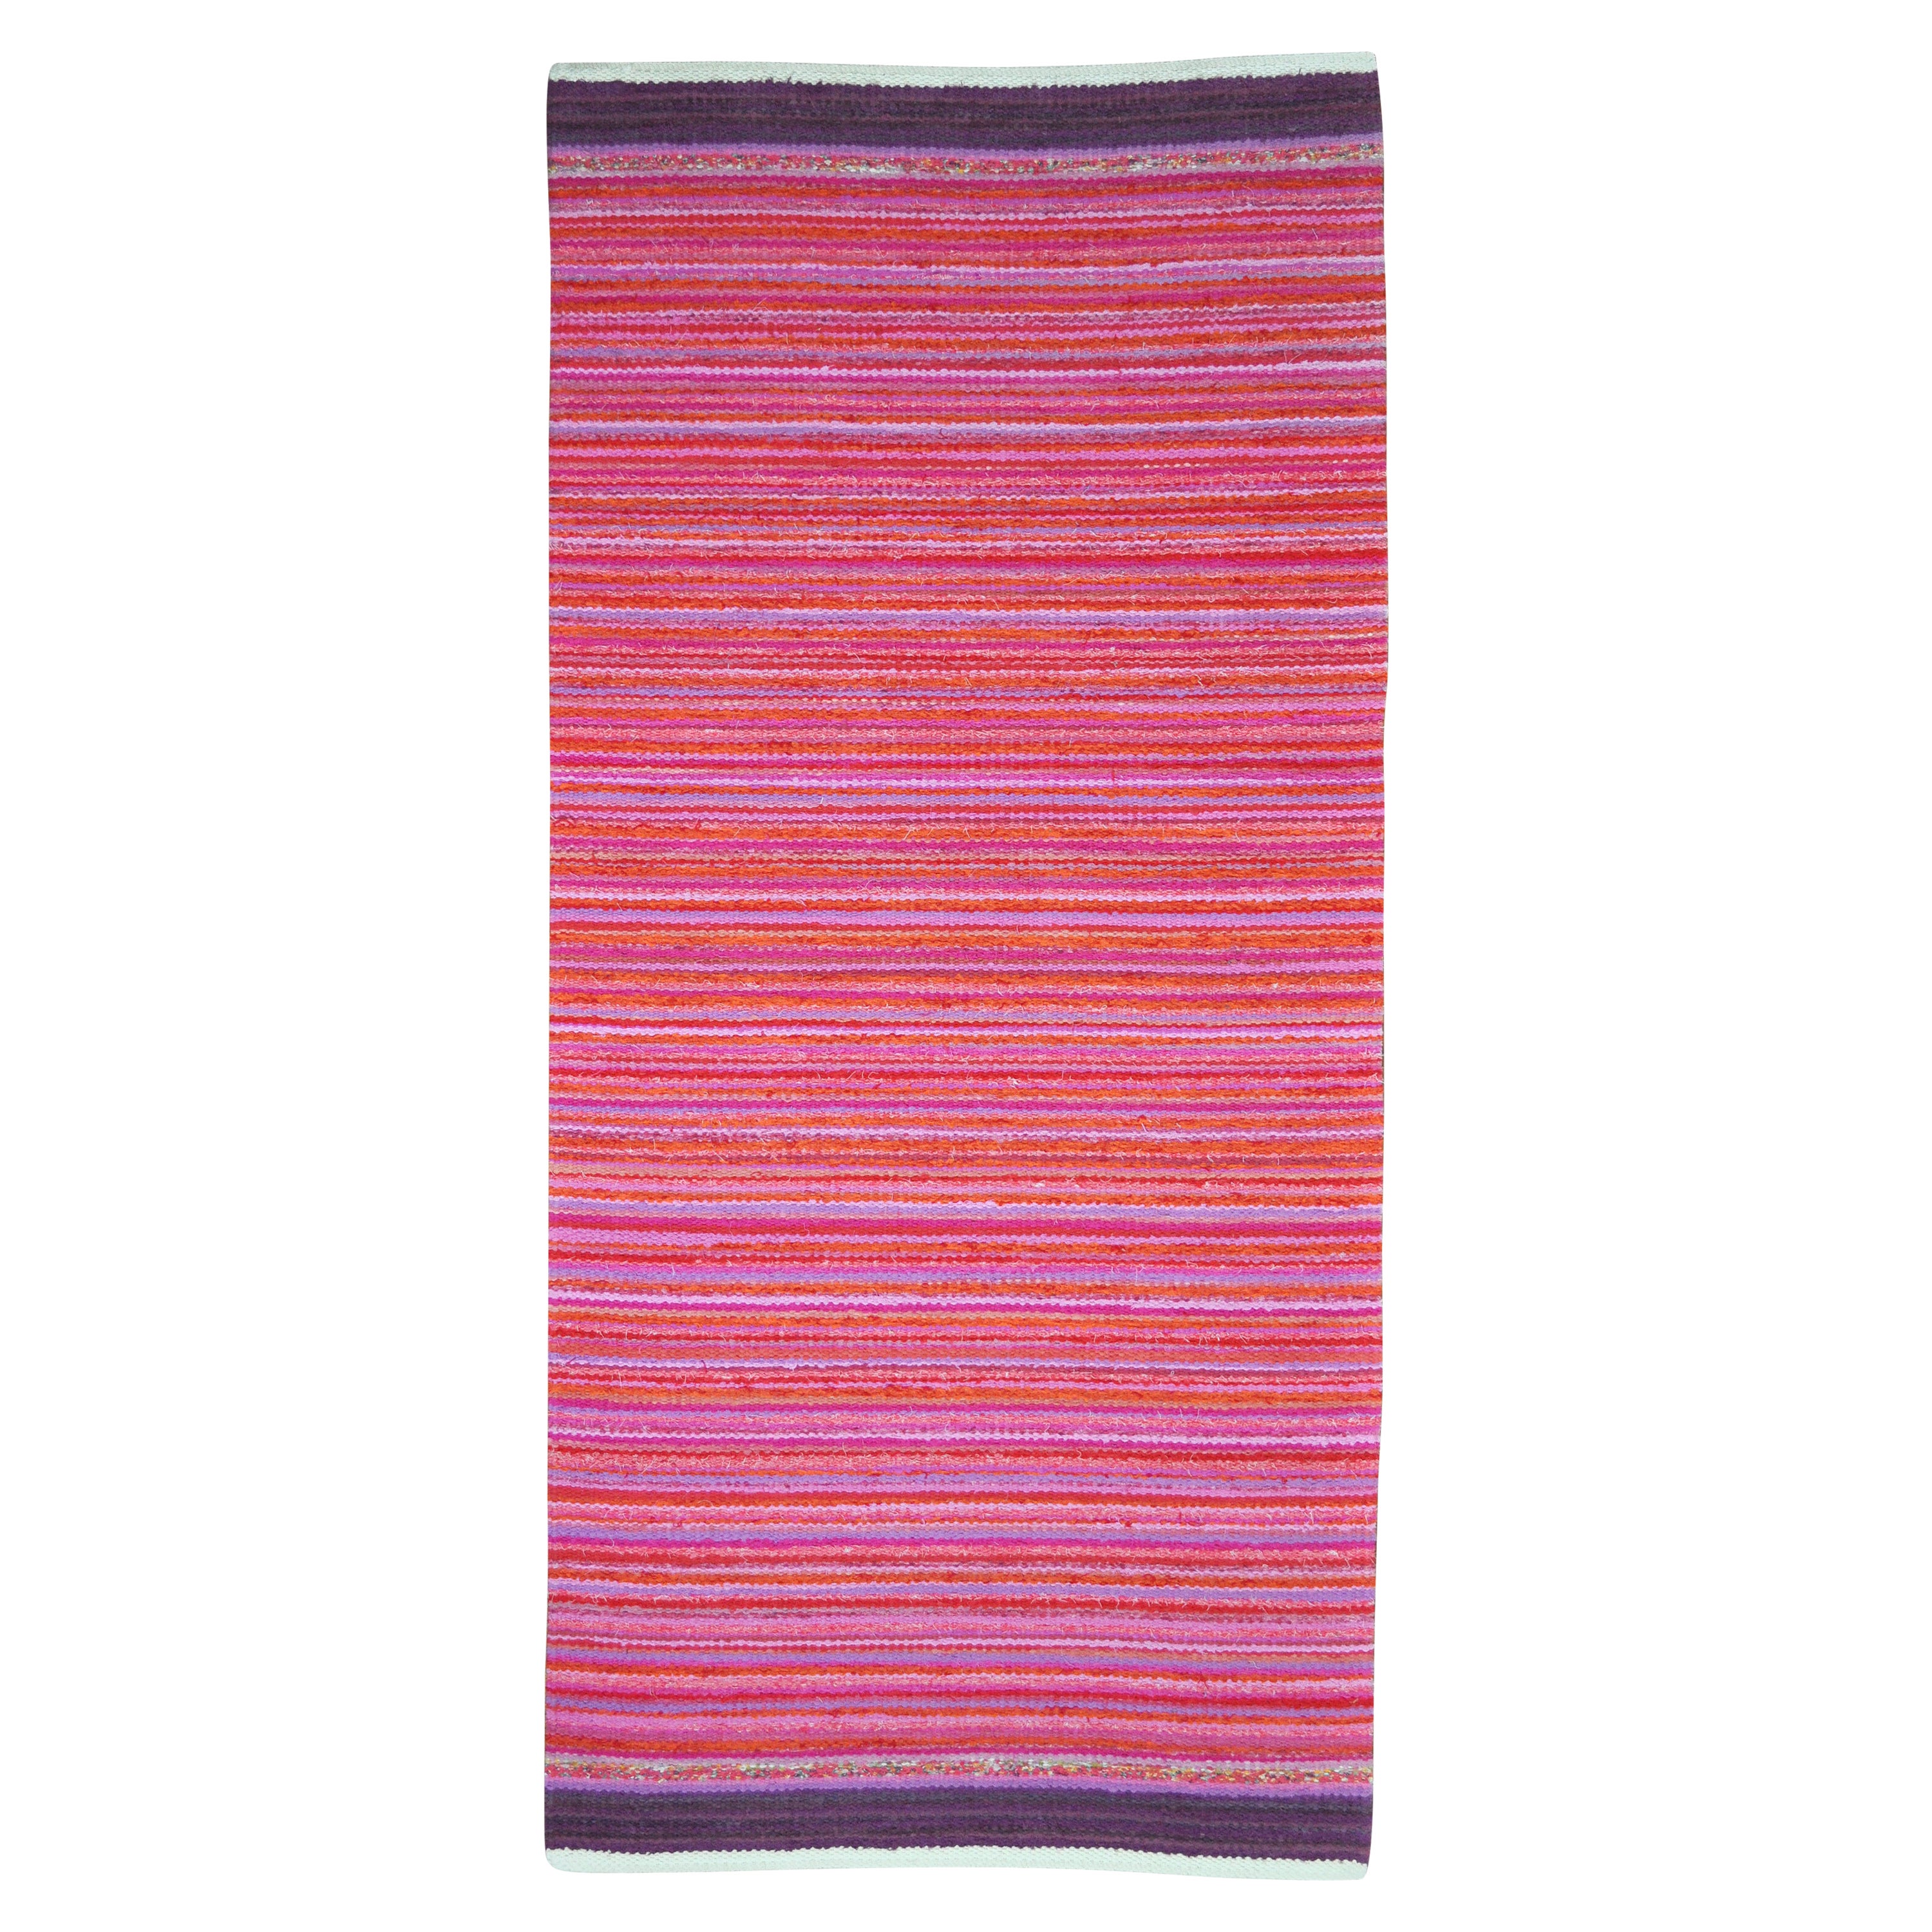 Contemporary Unique Handwoven Danish Rug in Recycled Materials For Sale ...